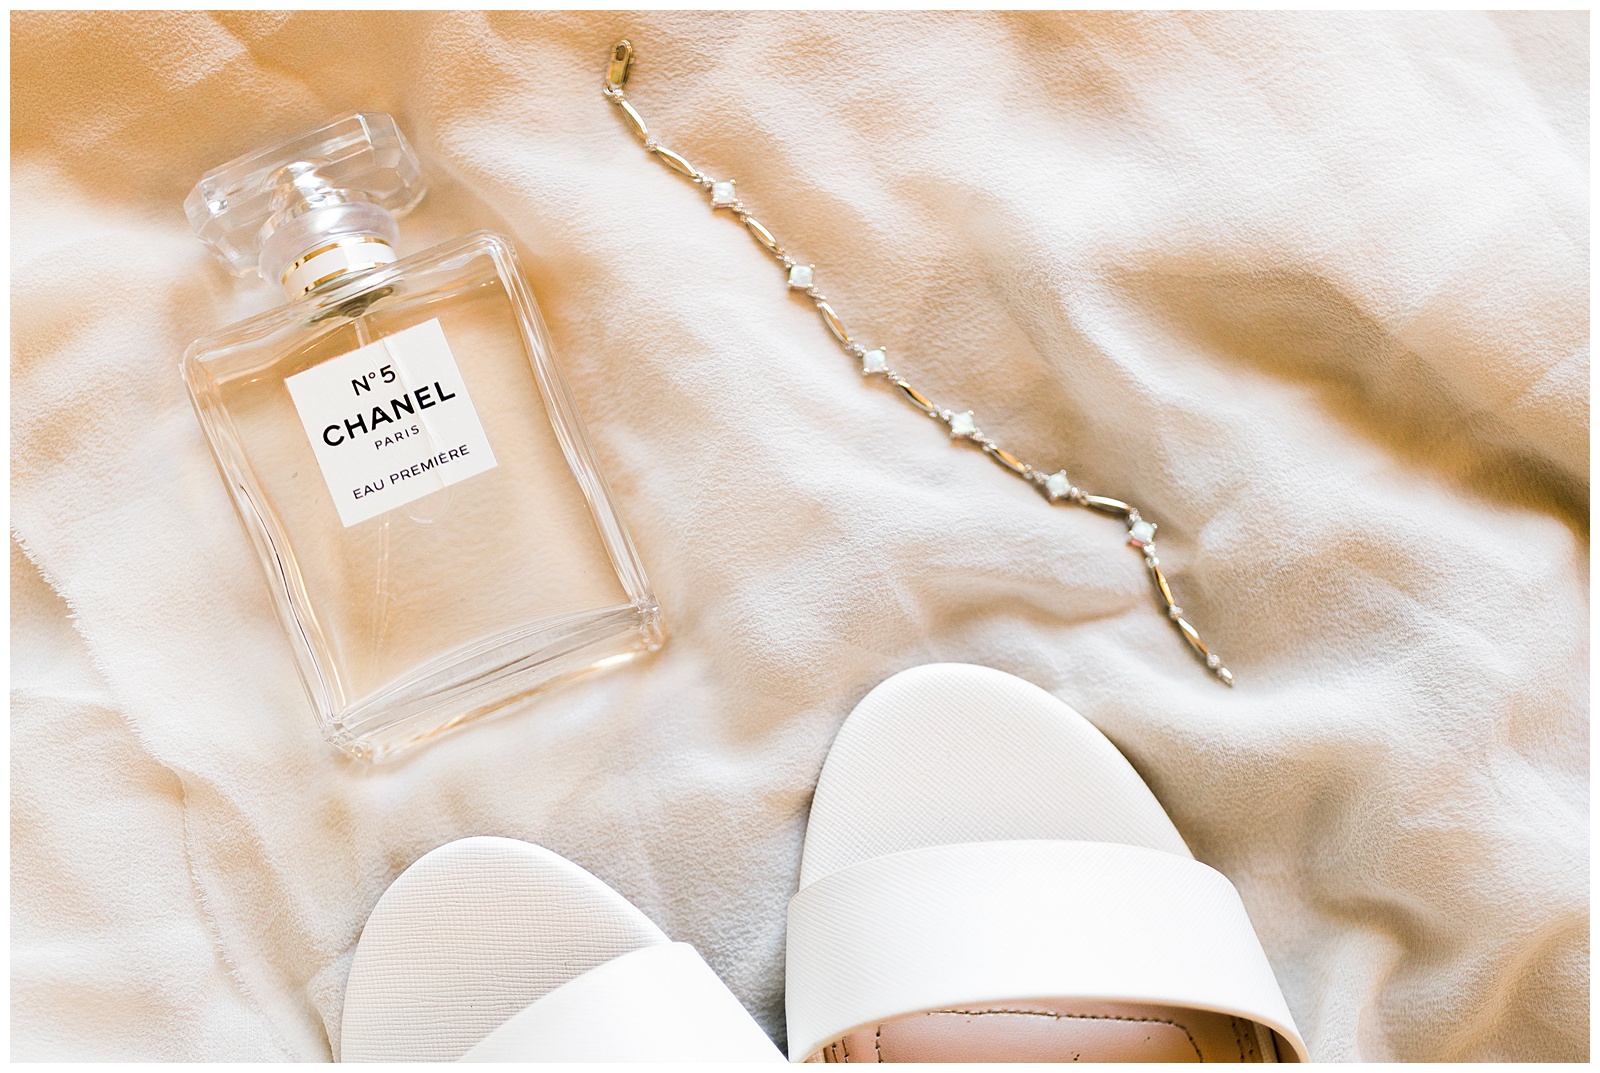 chanel no. 5 perfume and white sandals styled for wedding detail photos